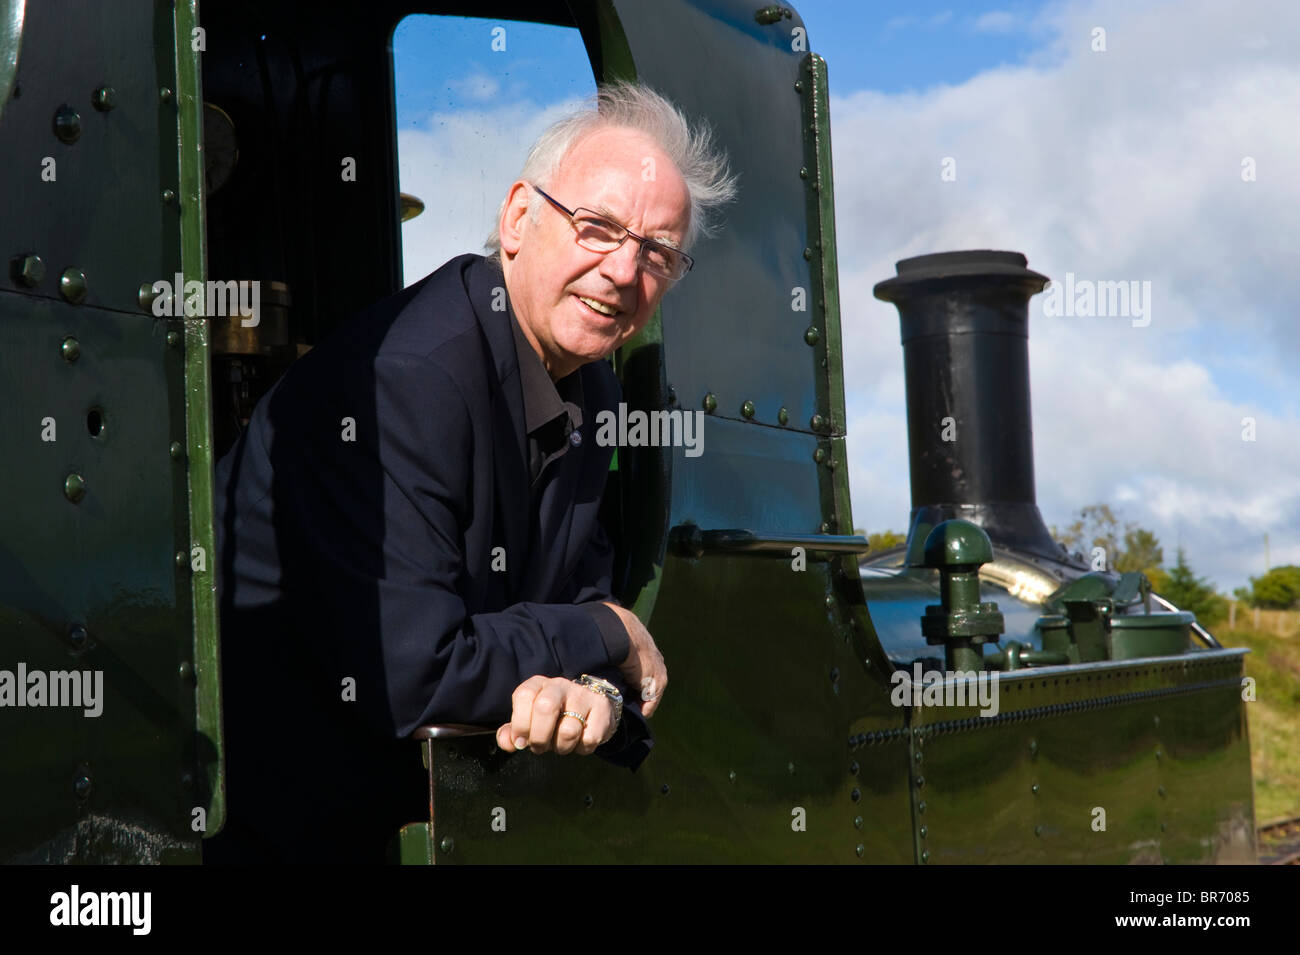 Pete Waterman railway enthusiast and record producer pictured opening Blaenavon High Level station Stock Photo